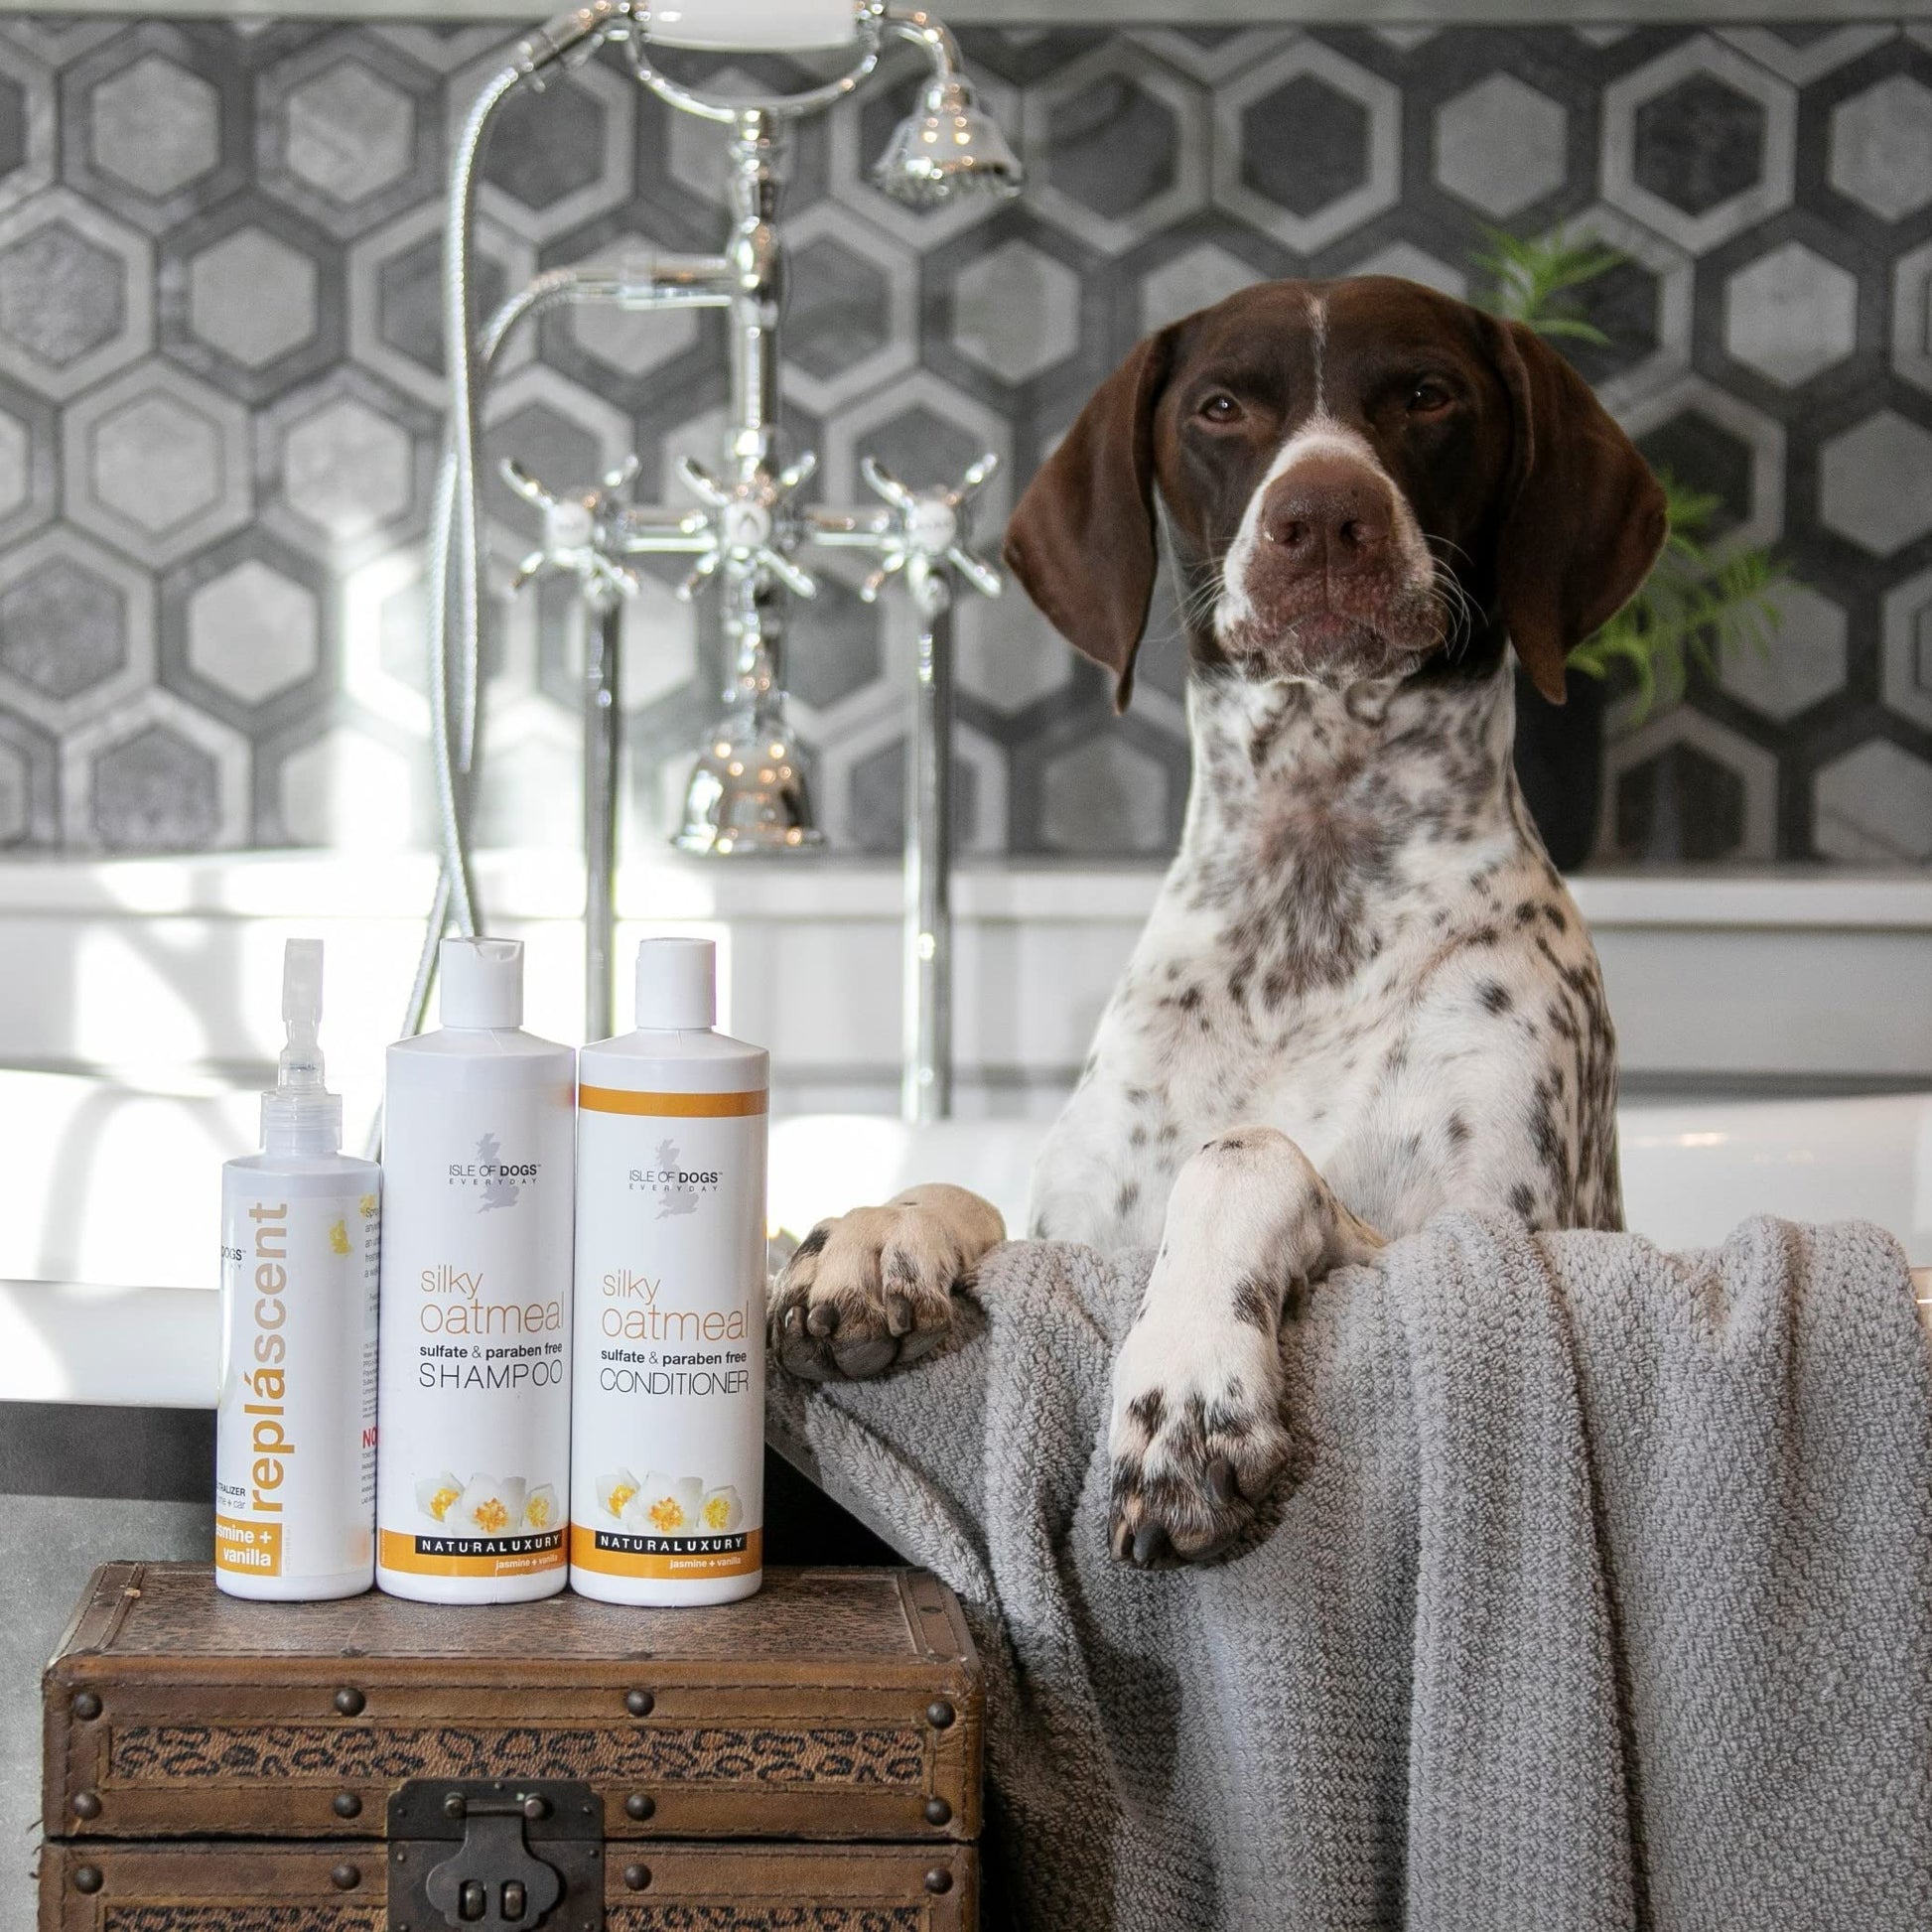 A dog standing next to a white bottle of dog shampoo with white flowers on the bottle